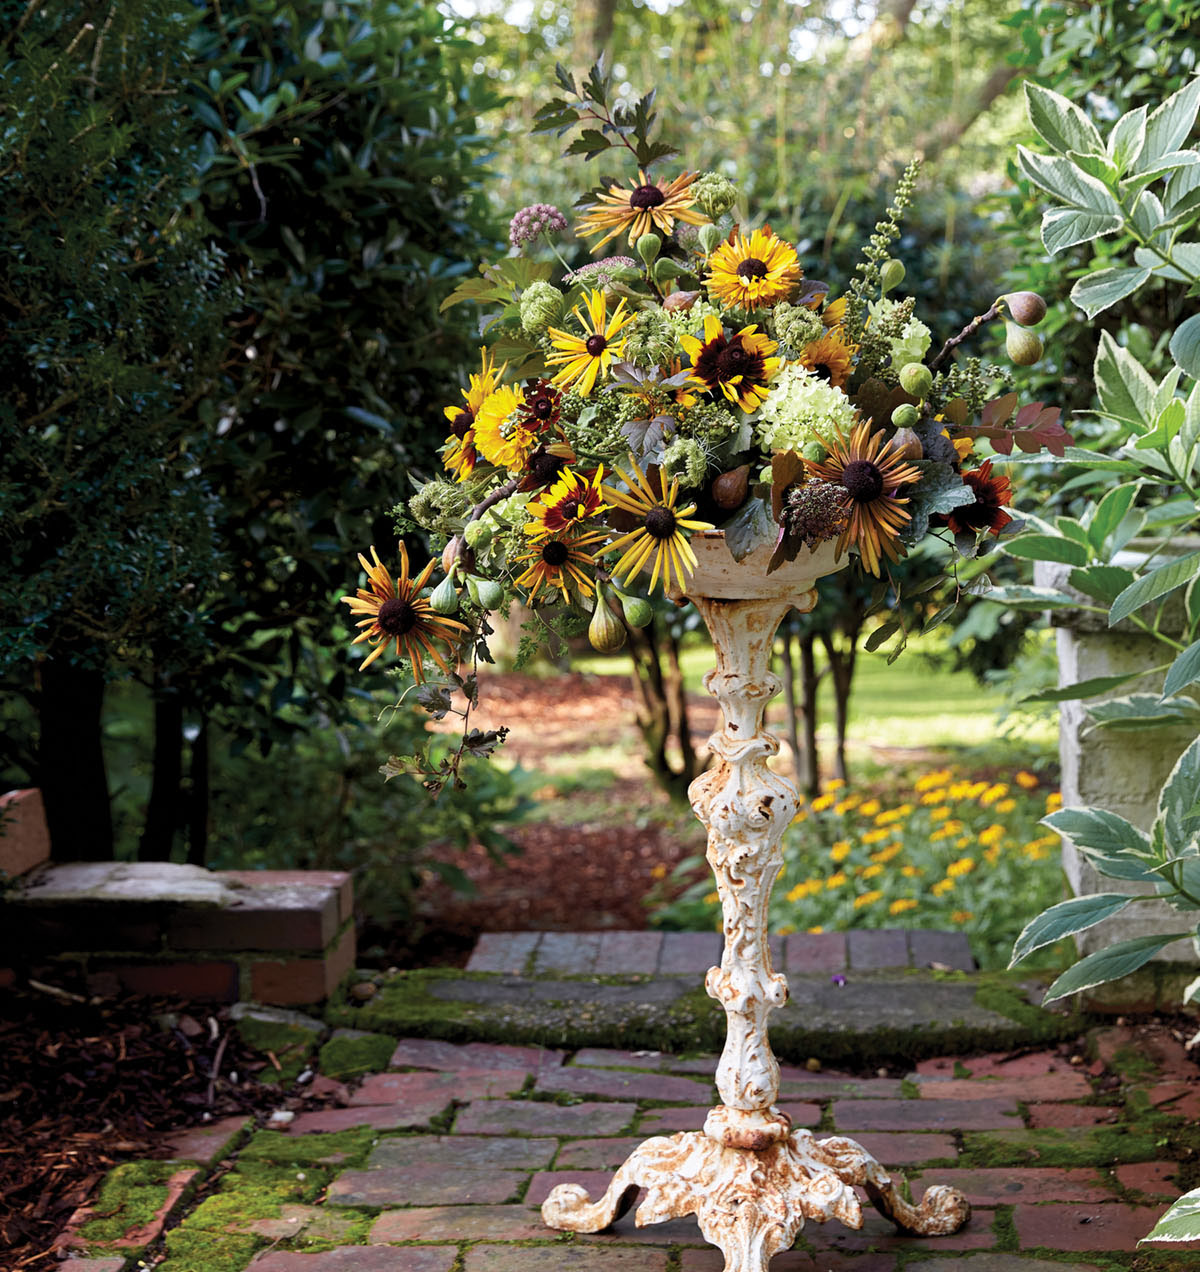 summer flower arrangement with yellow, rust, and green towns, arranged on an antique wrought iron pedestal piece painted white with rust showing. The pedestal stands on a mossy brick patio, with a lush summer garden in the background.